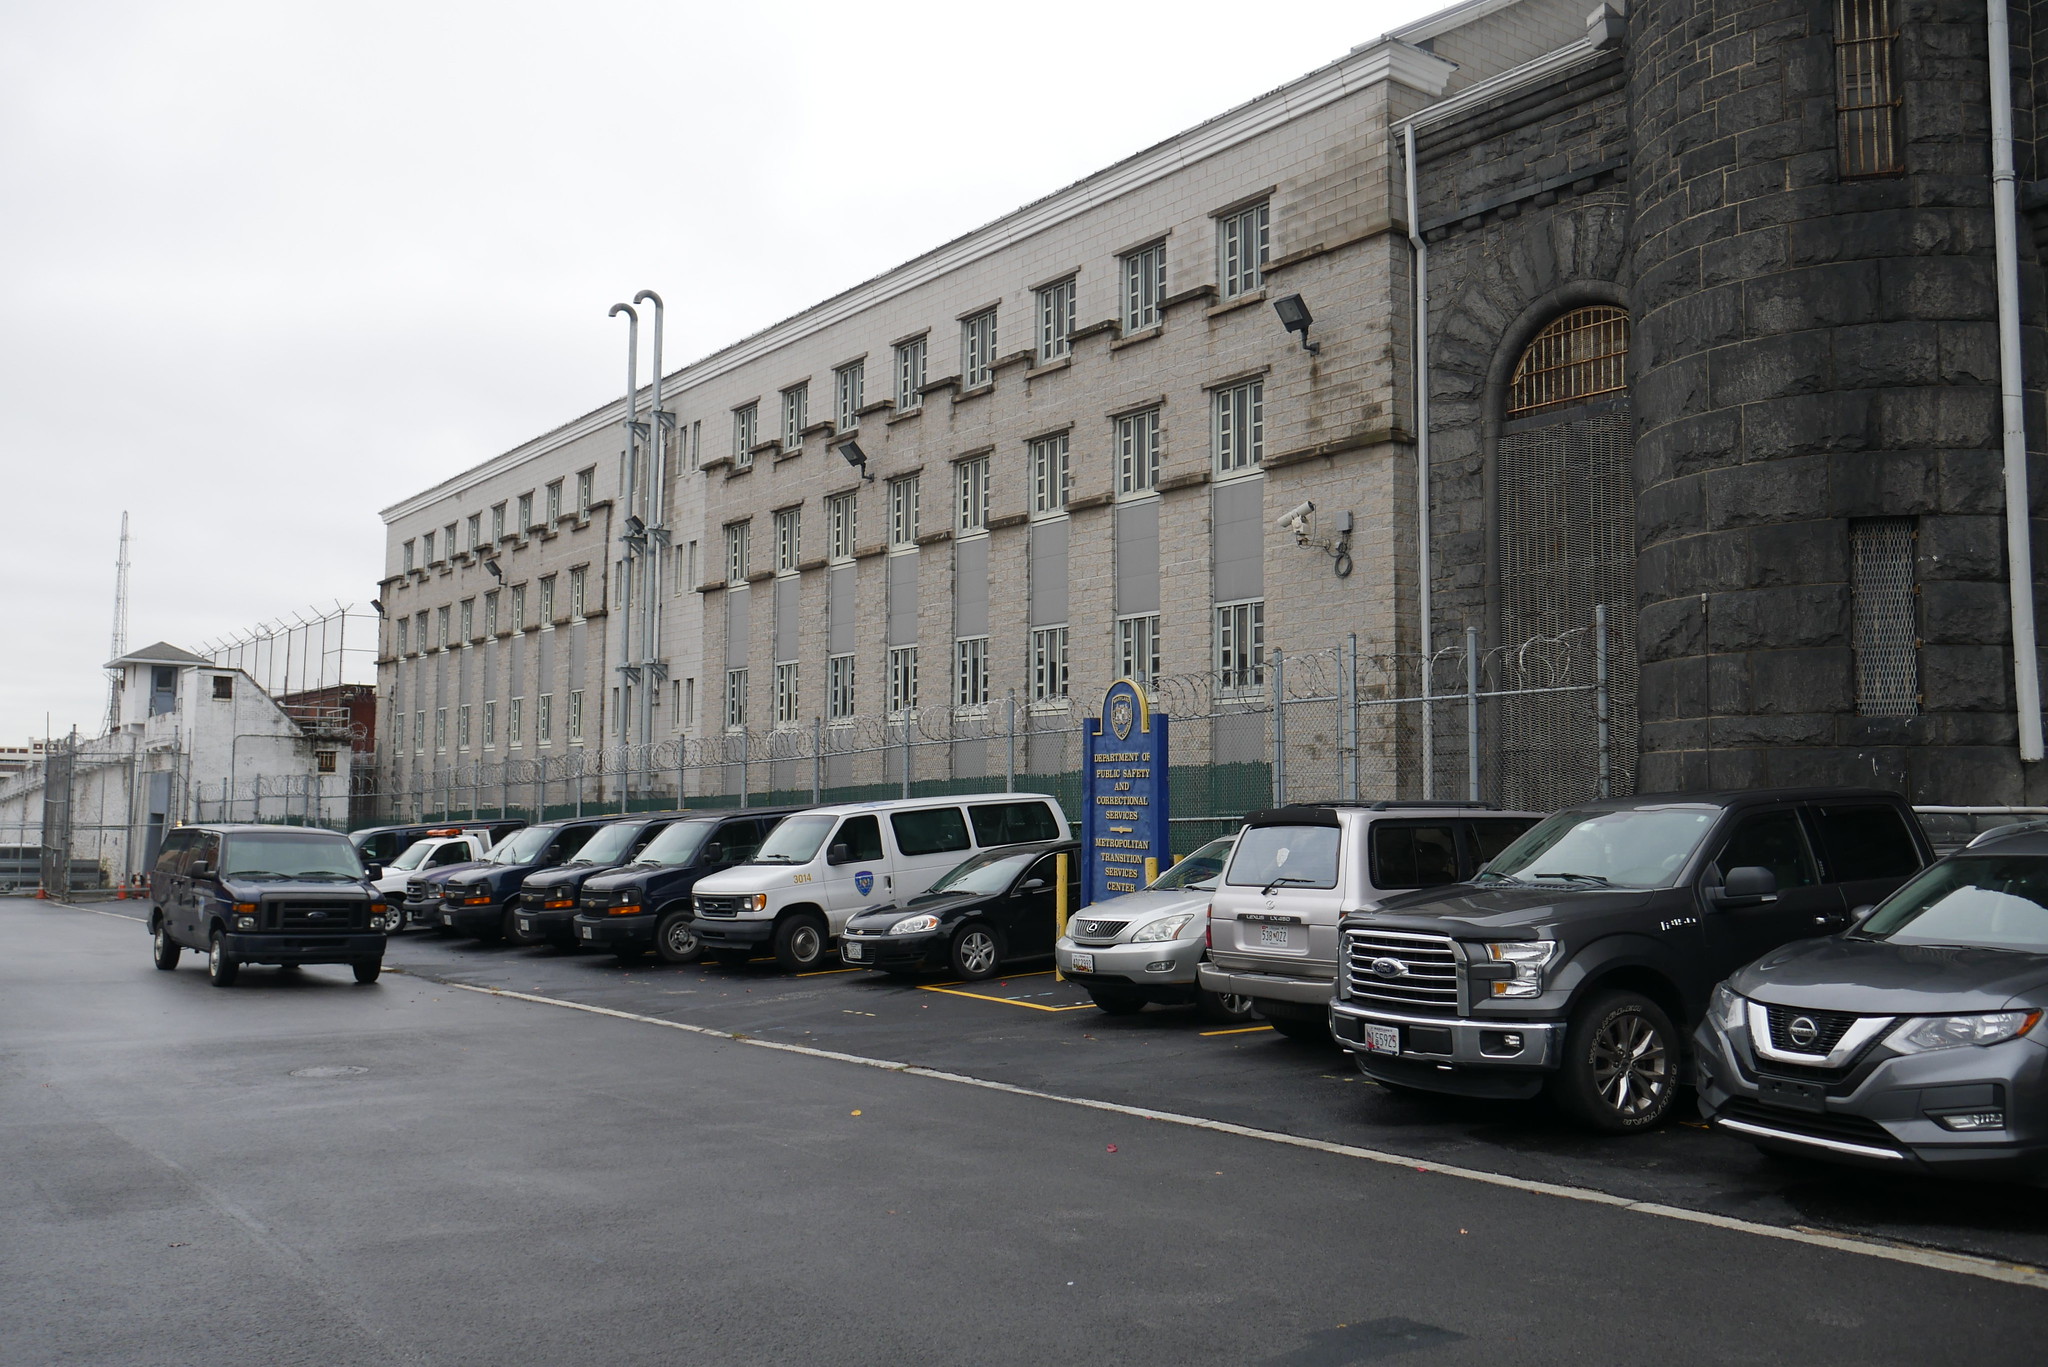 South wing, Metropolitan Transition Center/Former Maryland Penitentiary, 954 Forrest Street, Baltimore, MD 21202